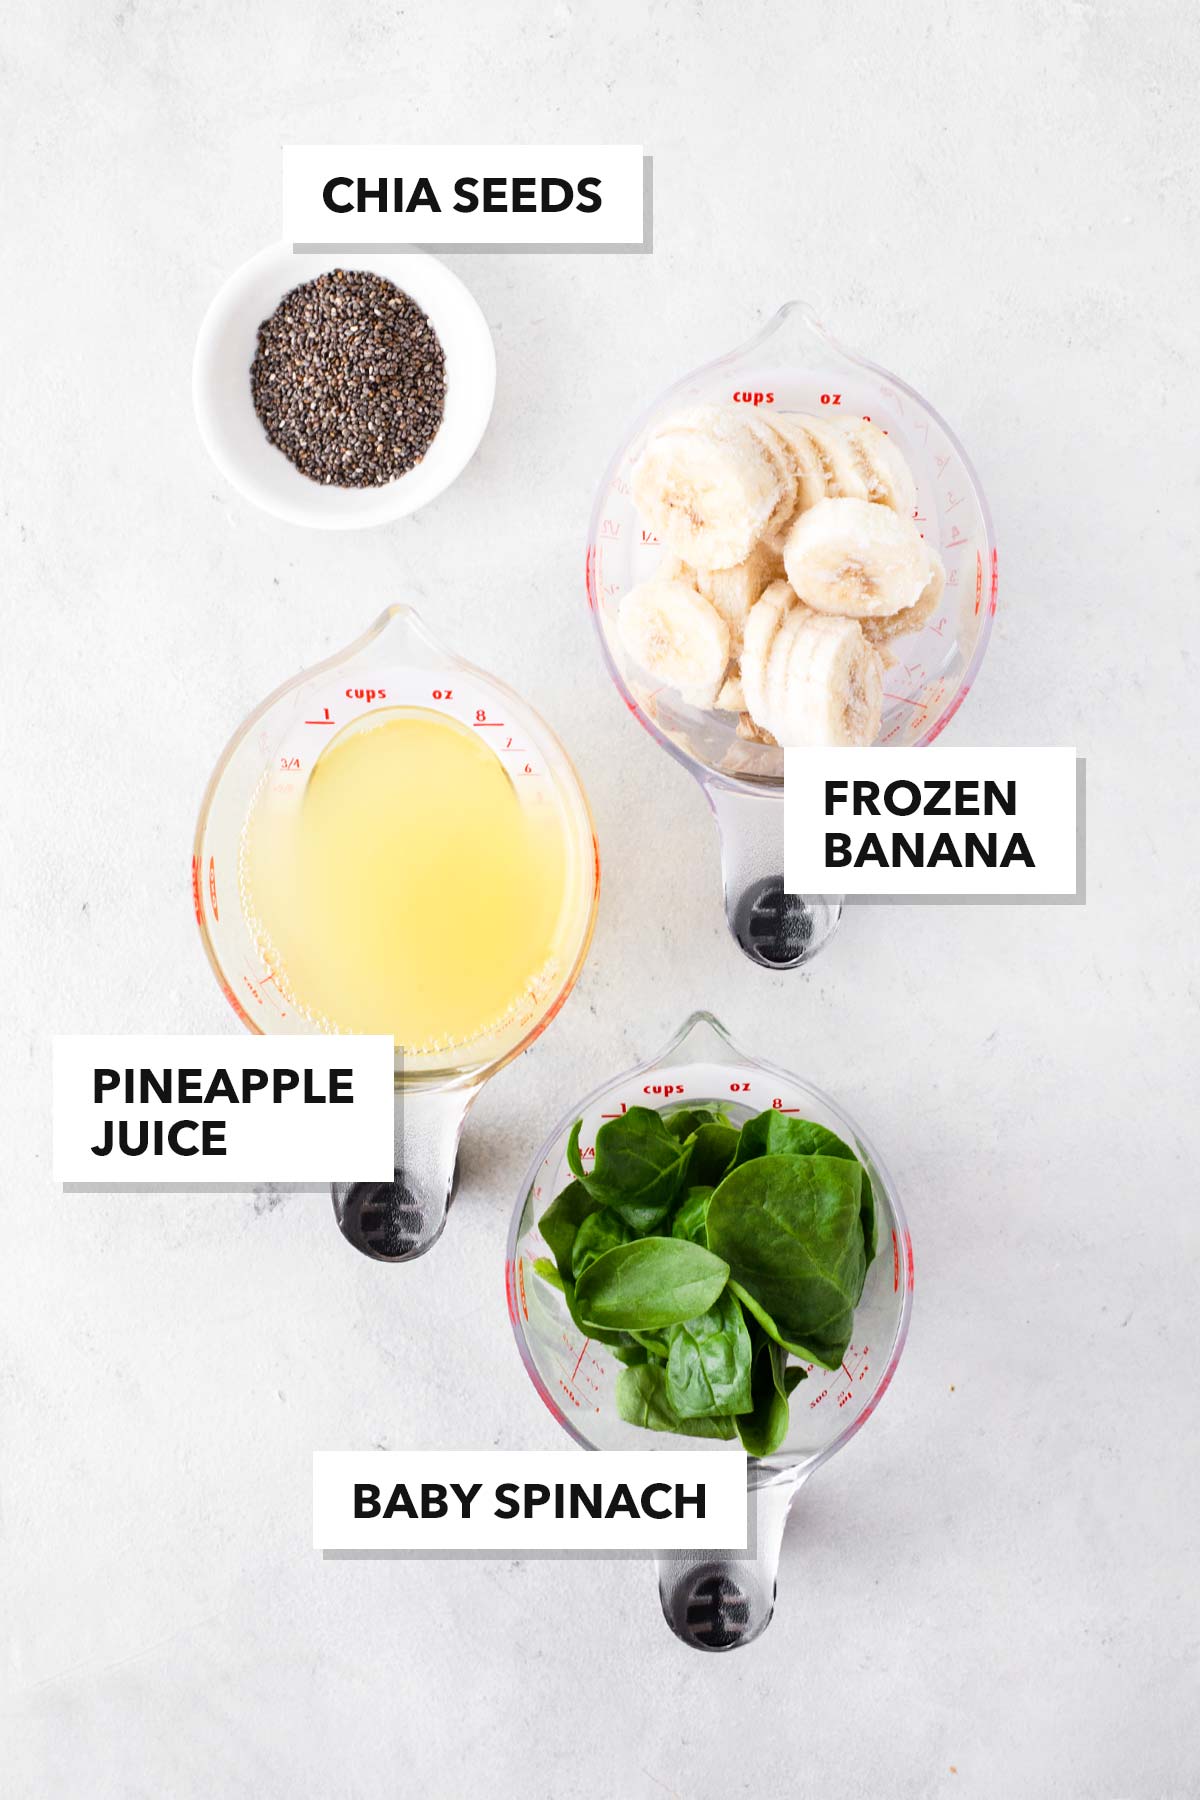 Ingredients for a spinach smoothie in a blender.